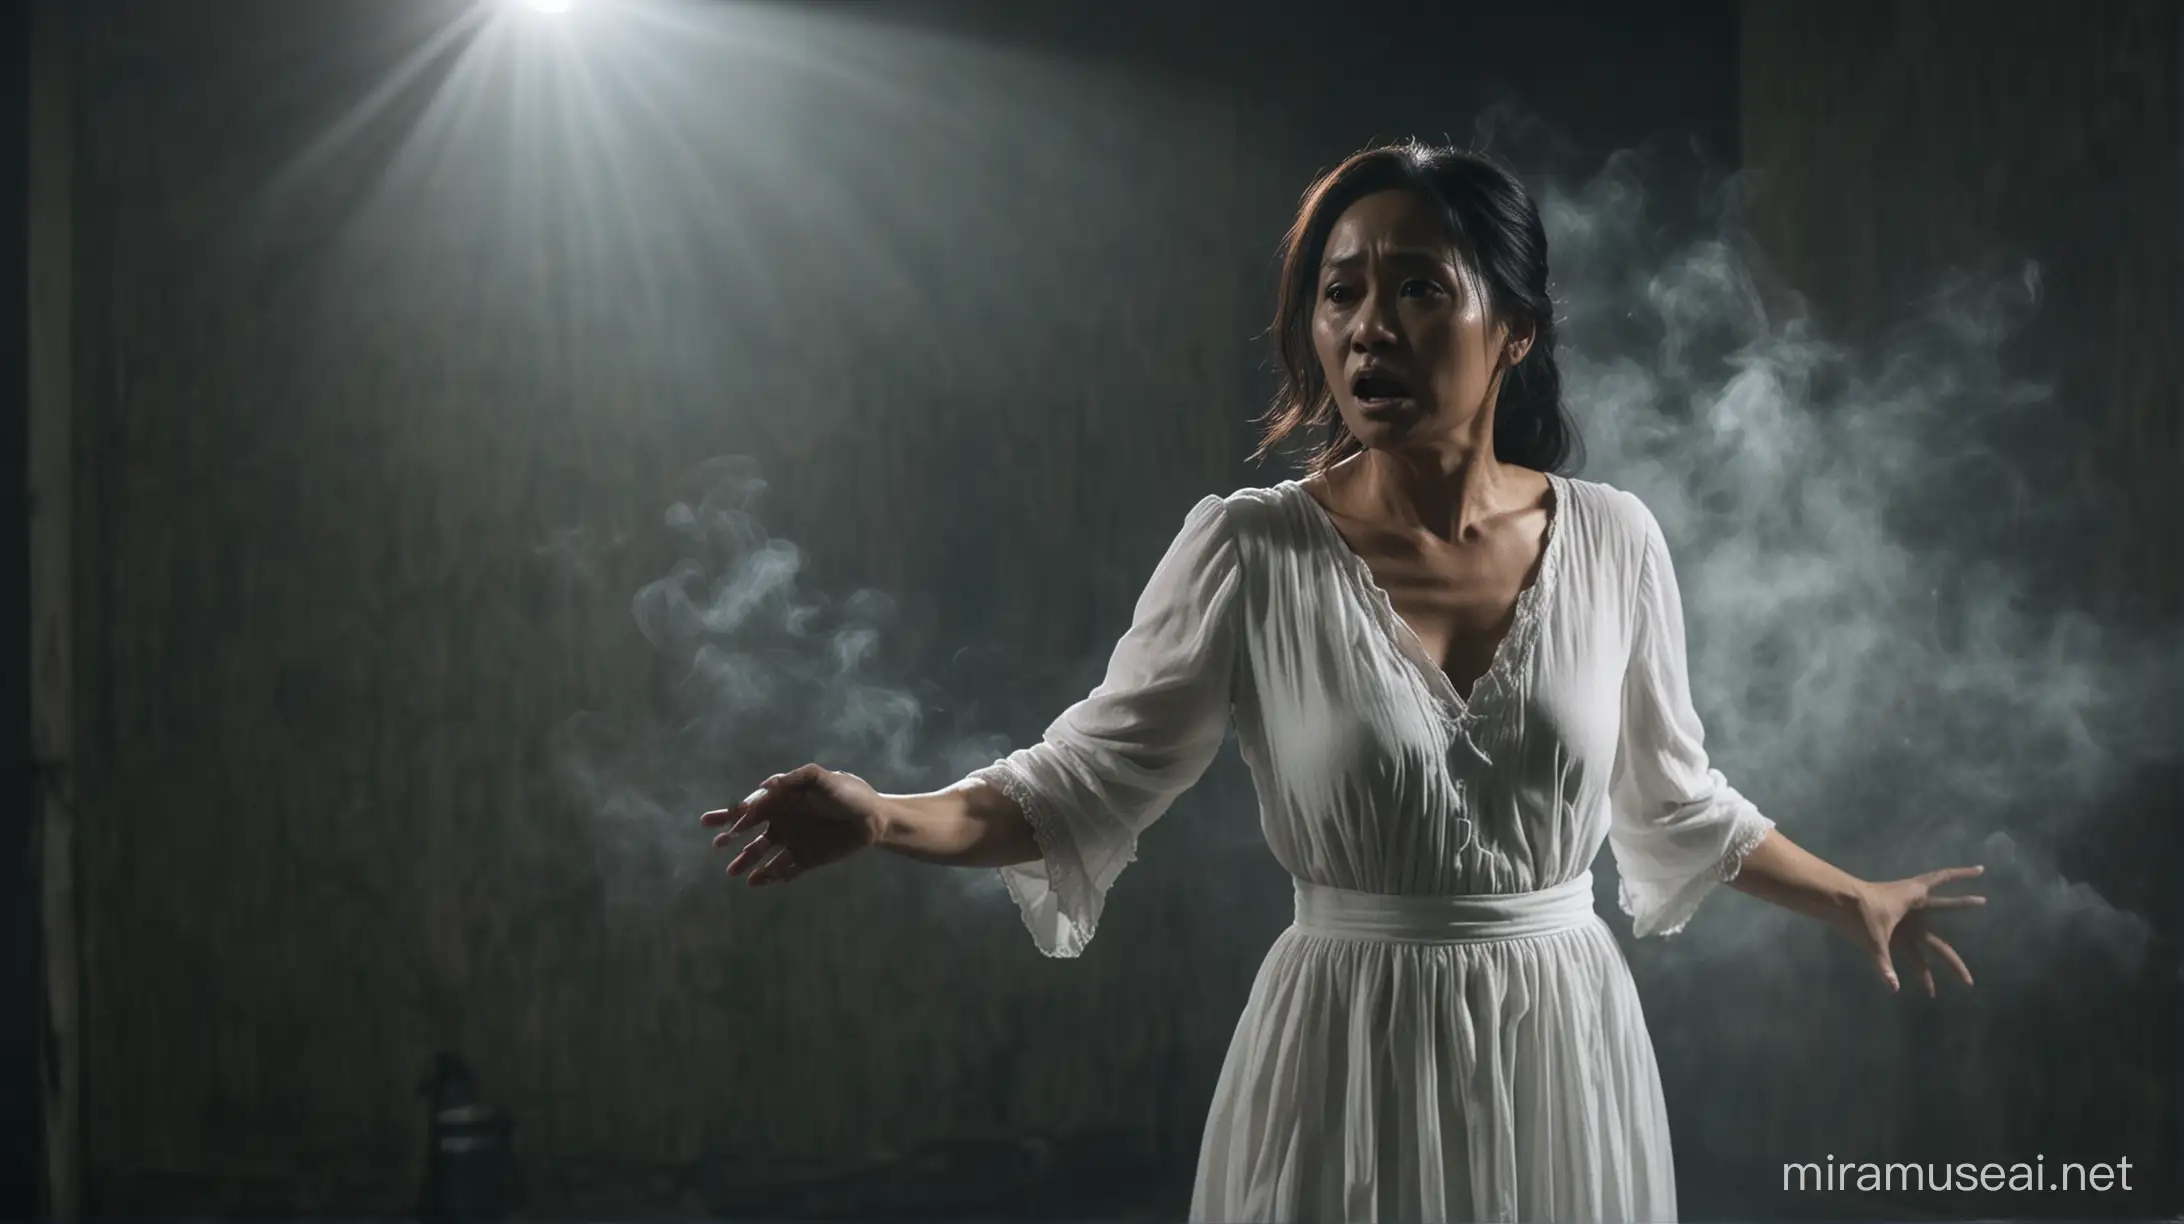 Eerie Ghost of a Filipino Woman in White Dress Pointing in Dark Room